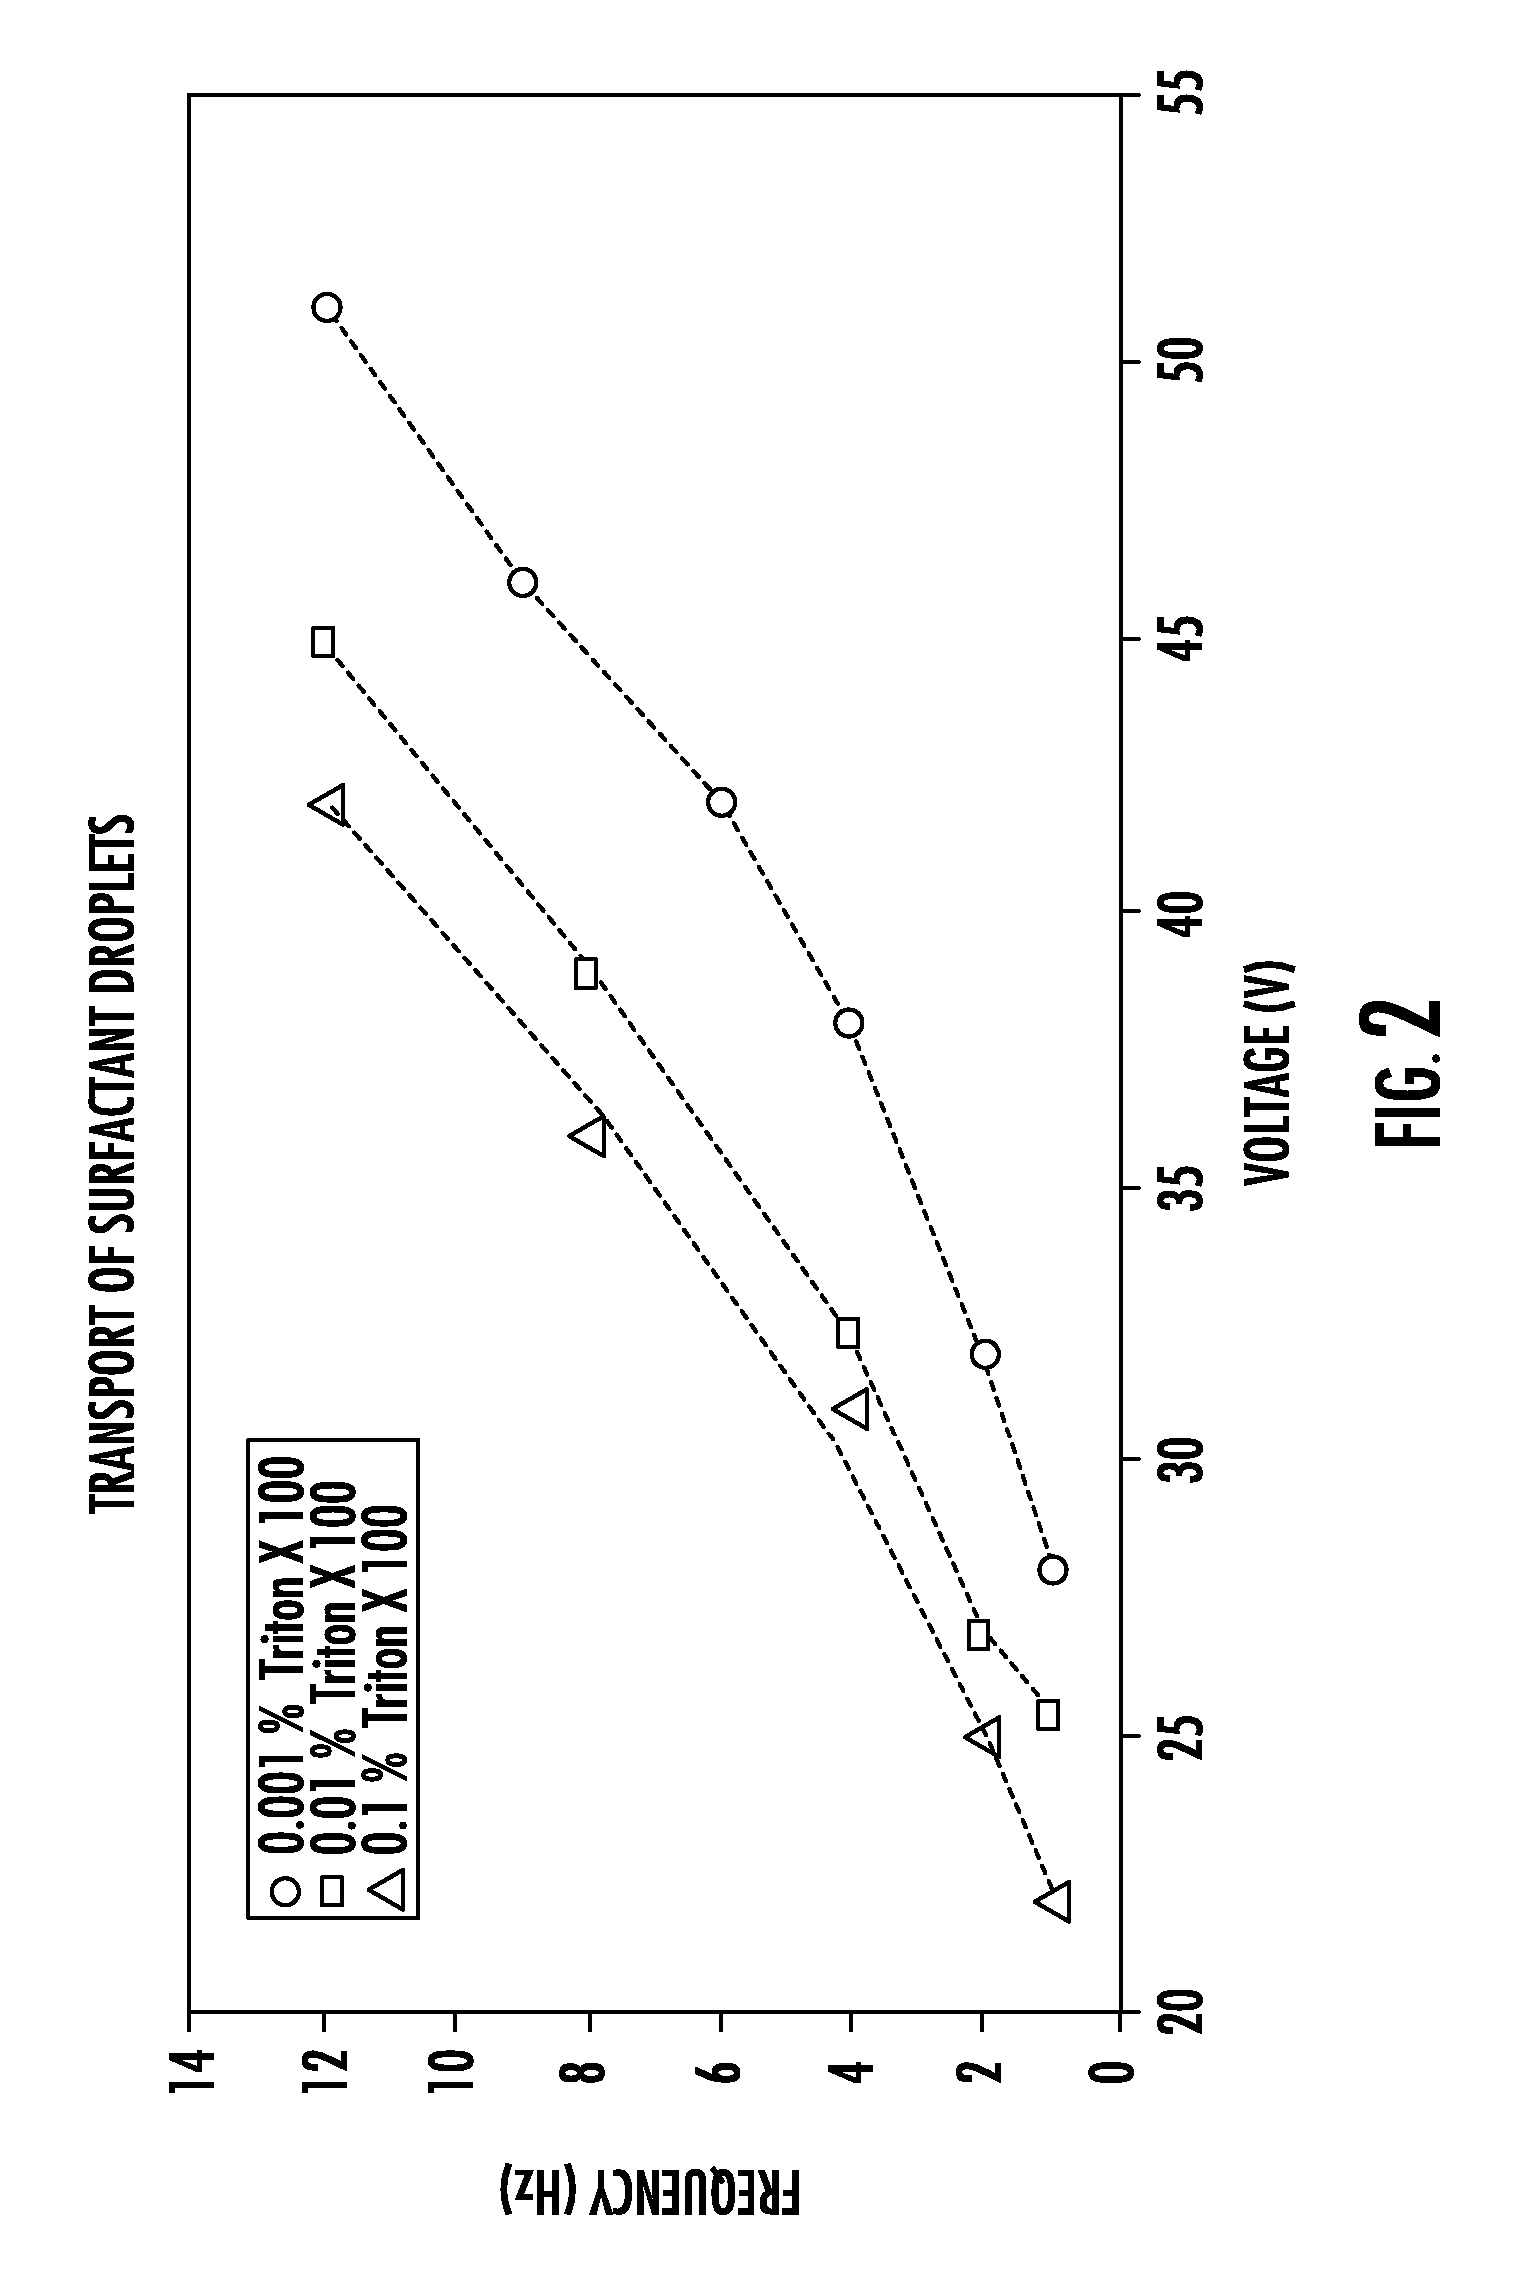 Method of electrowetting droplet operations for protein crystallization